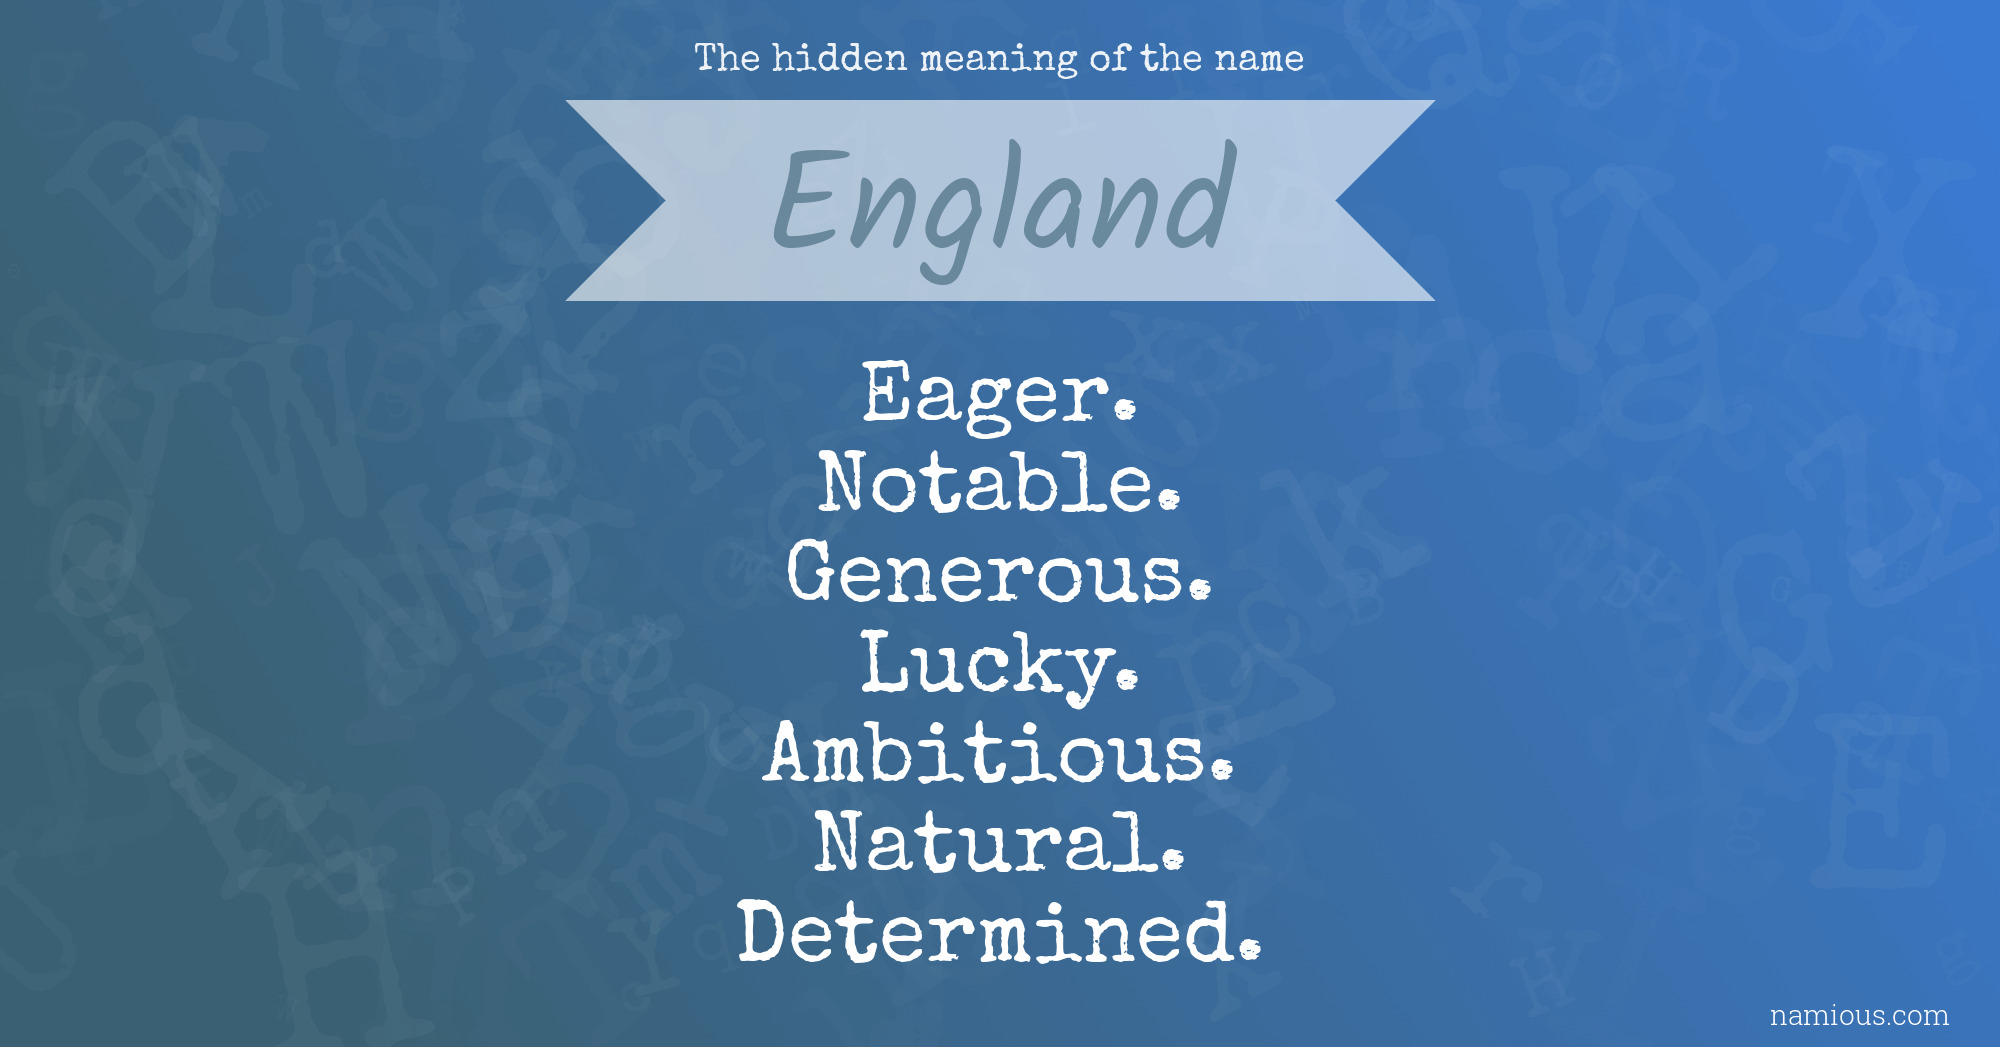 The hidden meaning of the name England